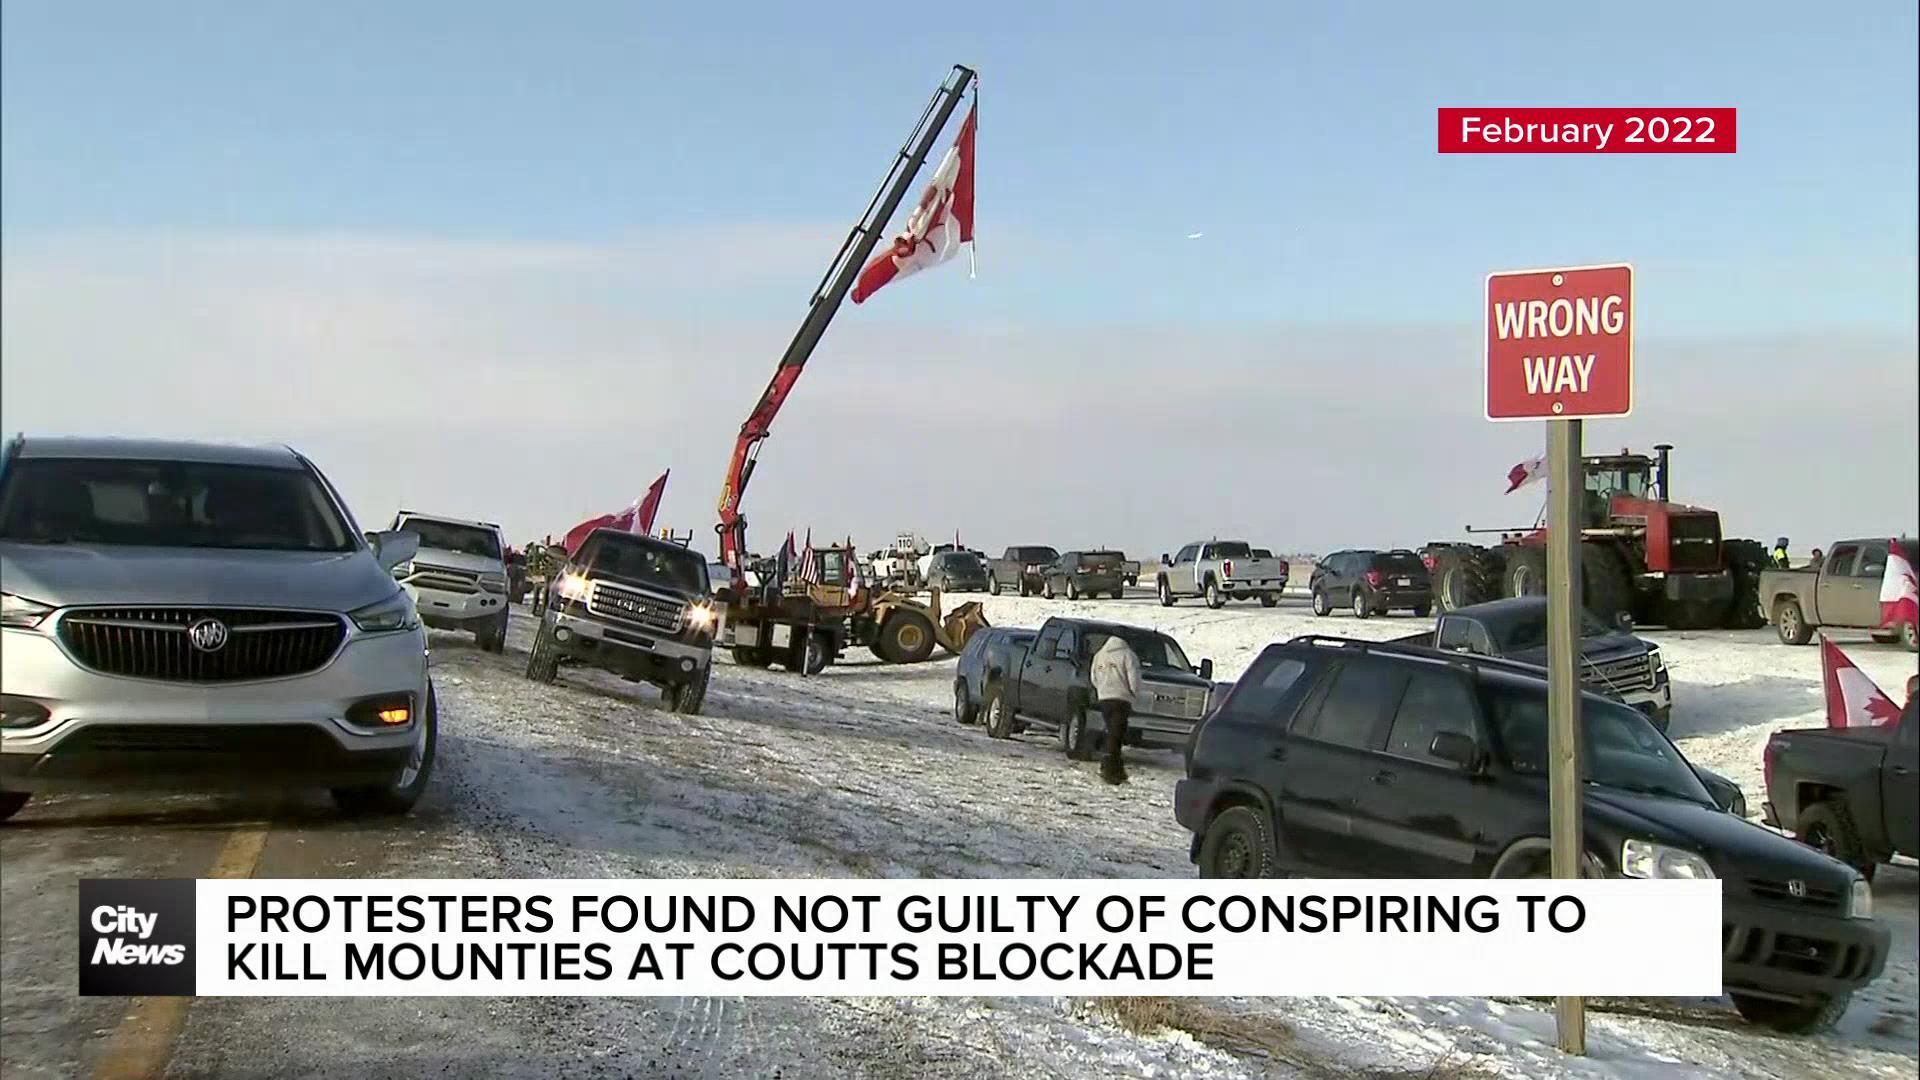 Two men found not guilty of conspiring to kill police at Coutts border blockade